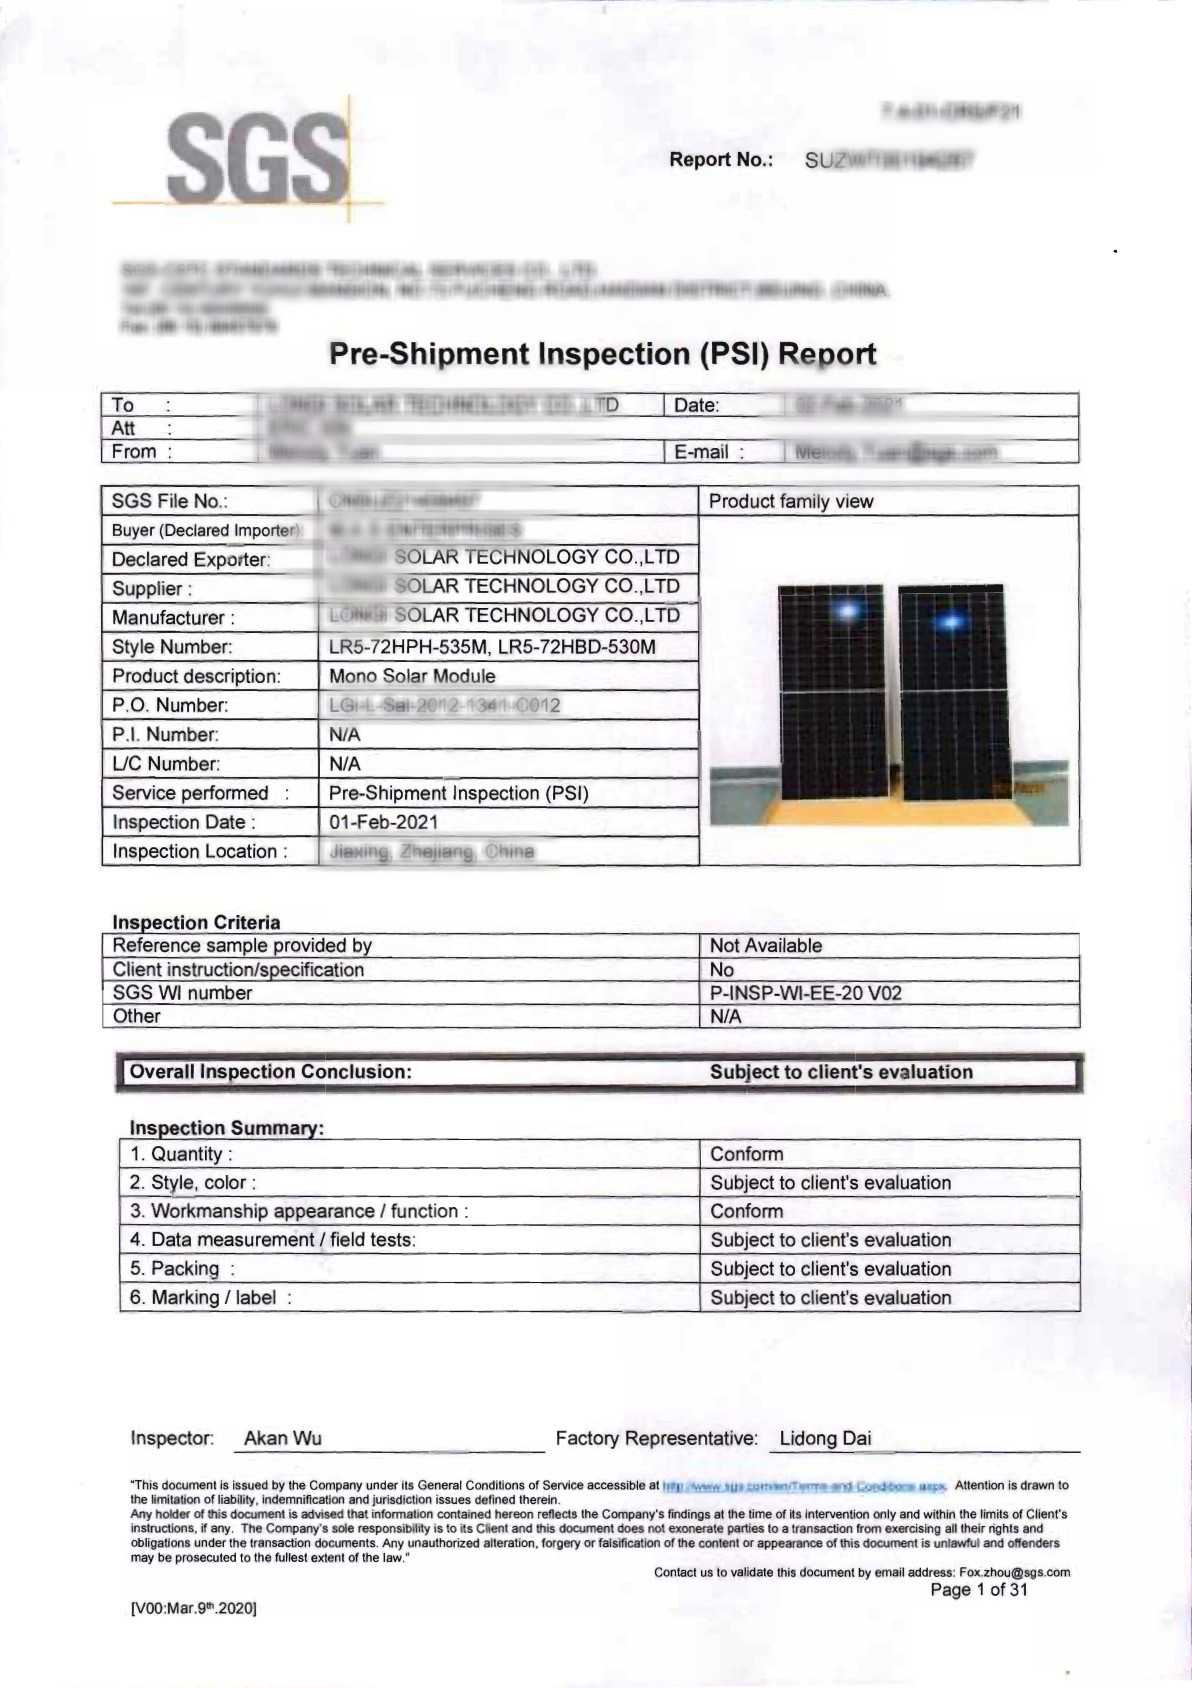 Pre-Shipment inspection report with product details